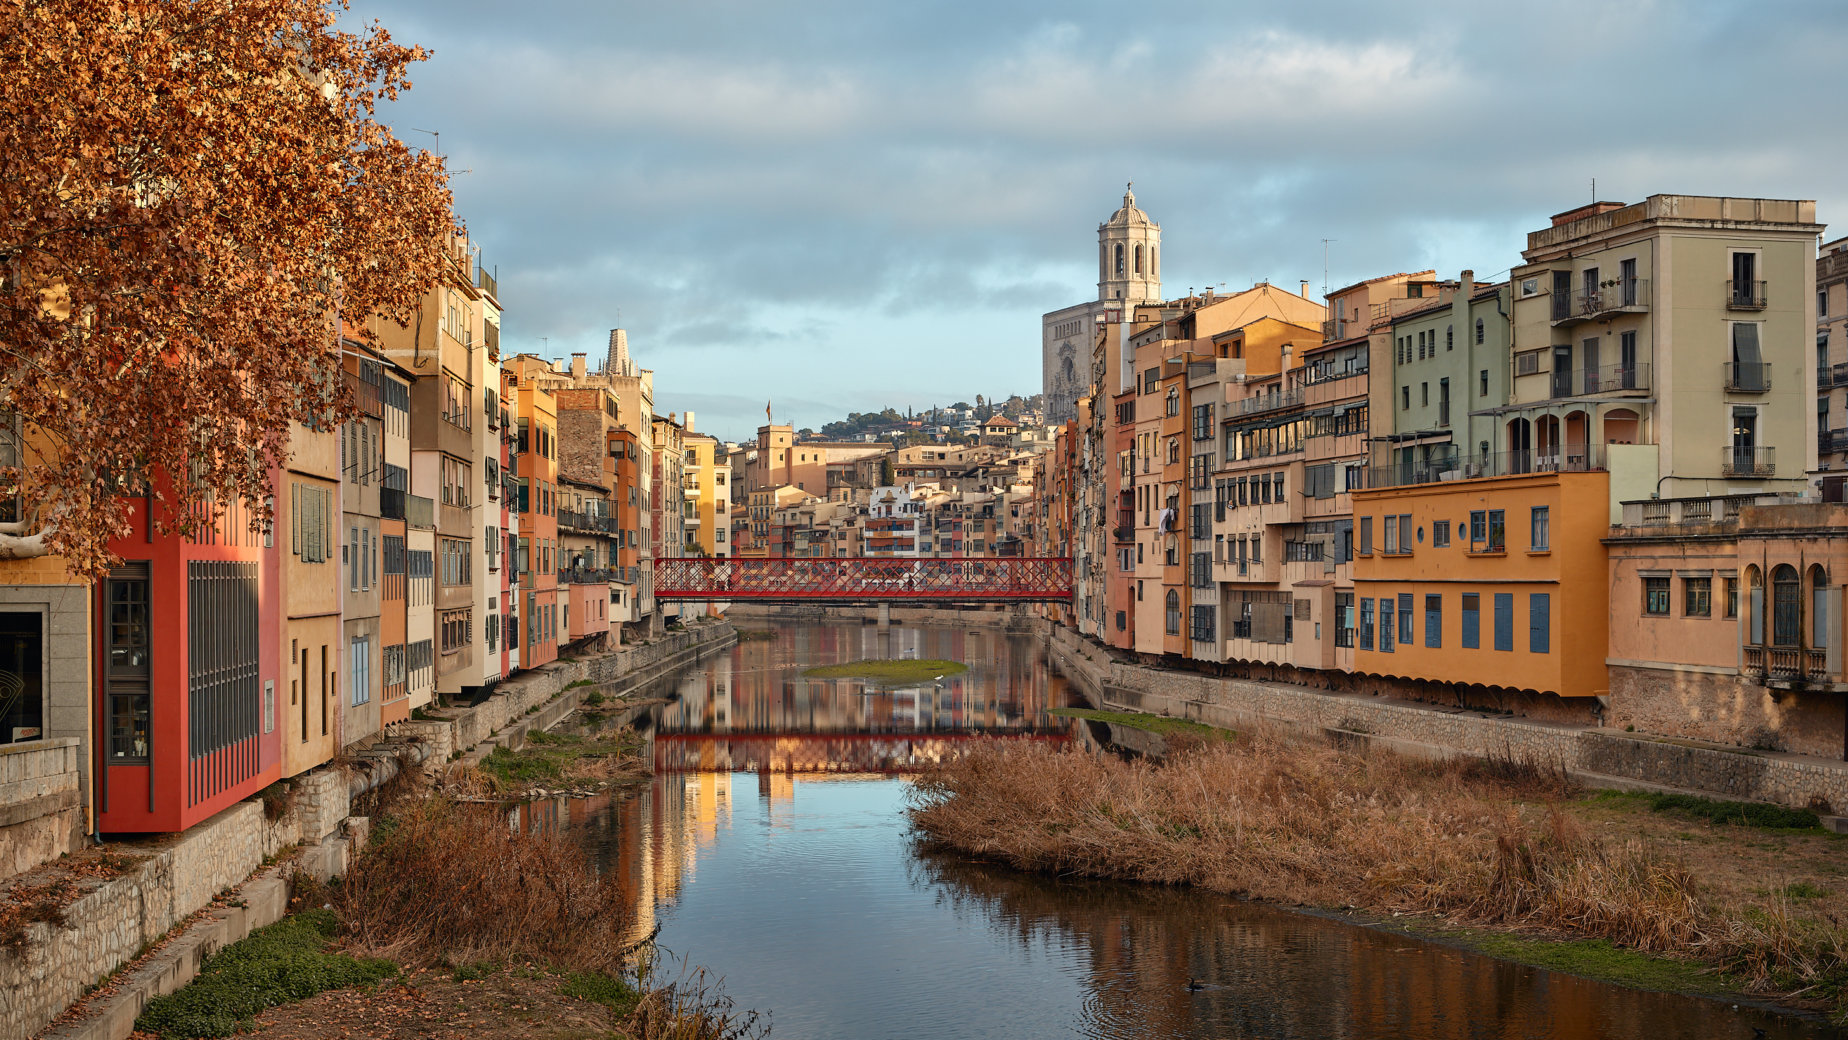 Girona, the Old Town by Robert Moranelli